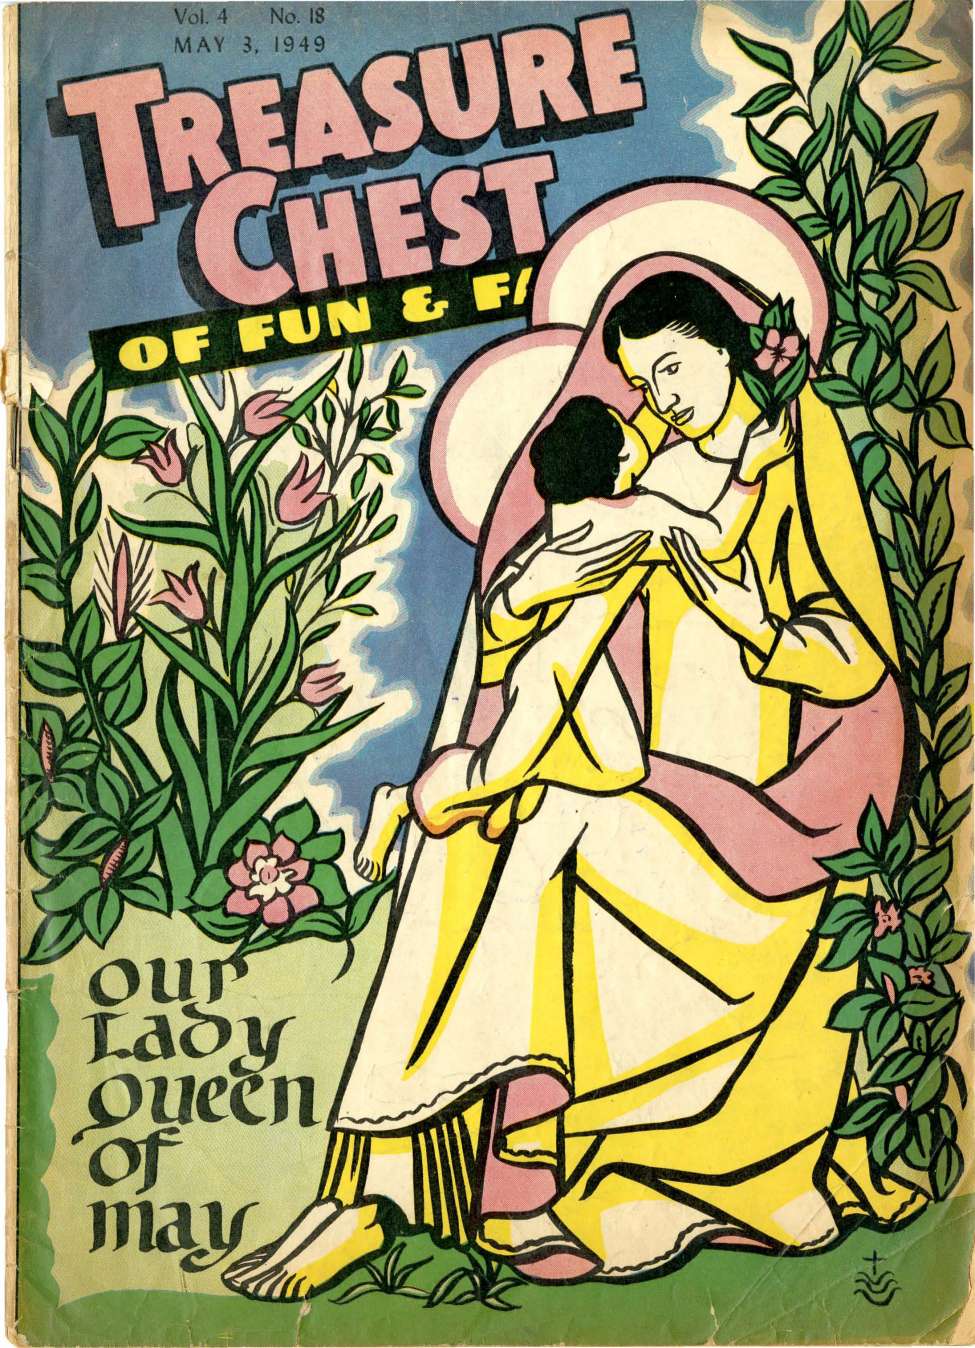 Comic Book Cover For Treasure Chest of Fun and Fact v4 18